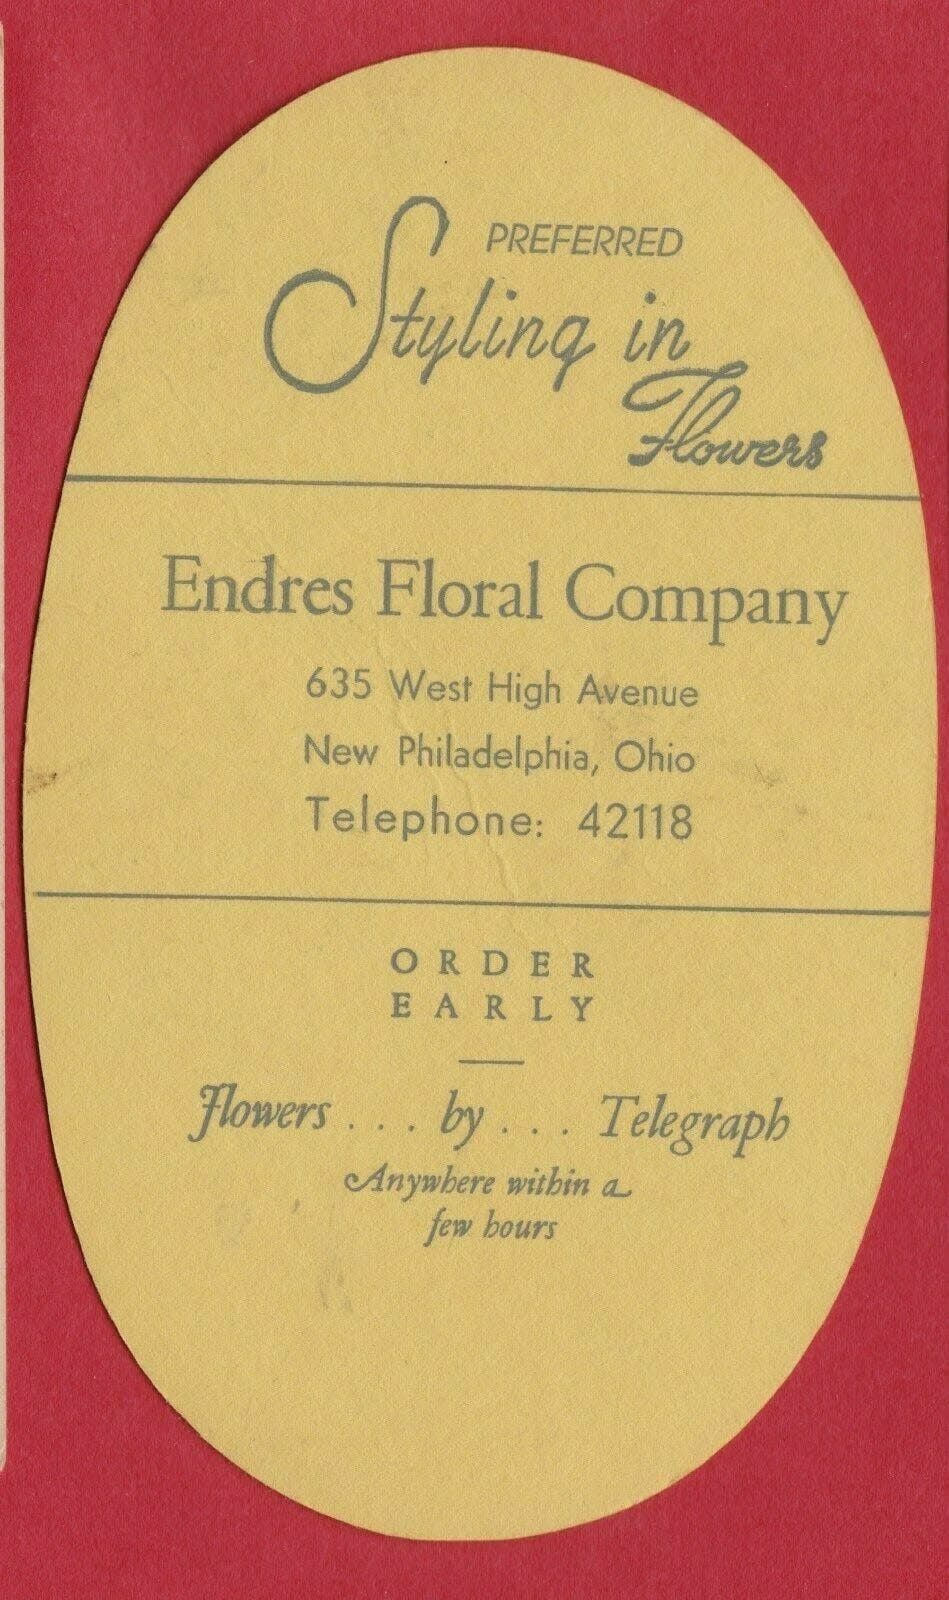 The Endres Floral Co. of New Philadelphia was once the largest independent rose-growing operation in the eastern United States.